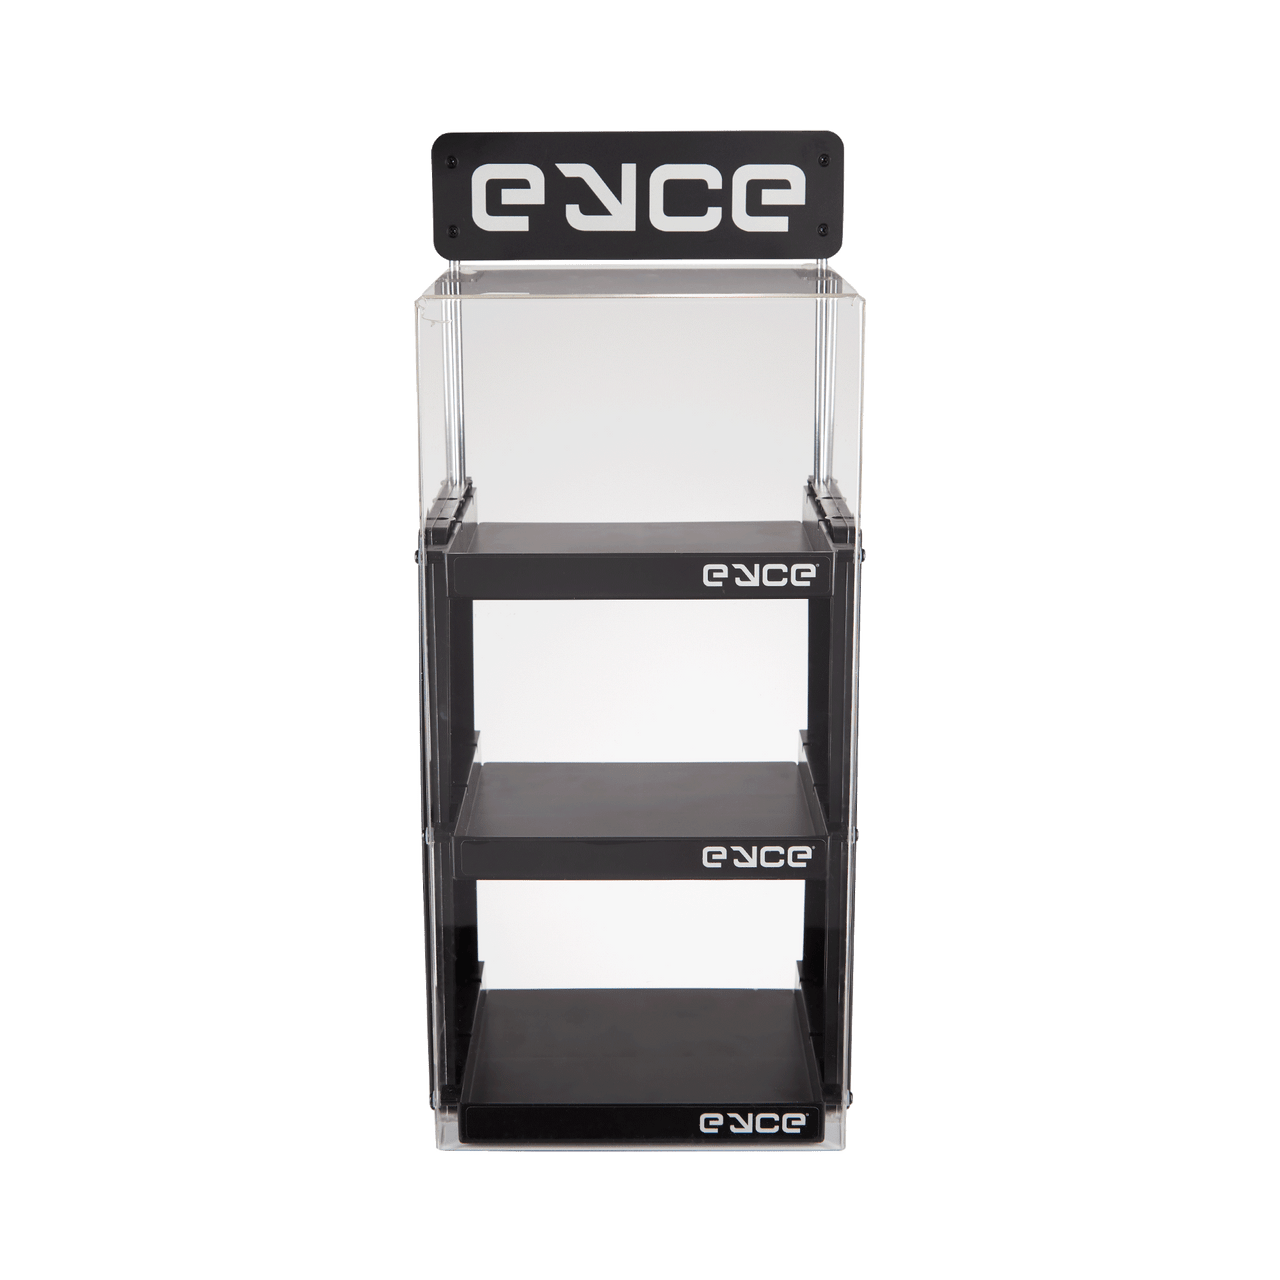 Eyce Counter Top Display Bundle | Loaded with Solo, Shorty, and Spoon